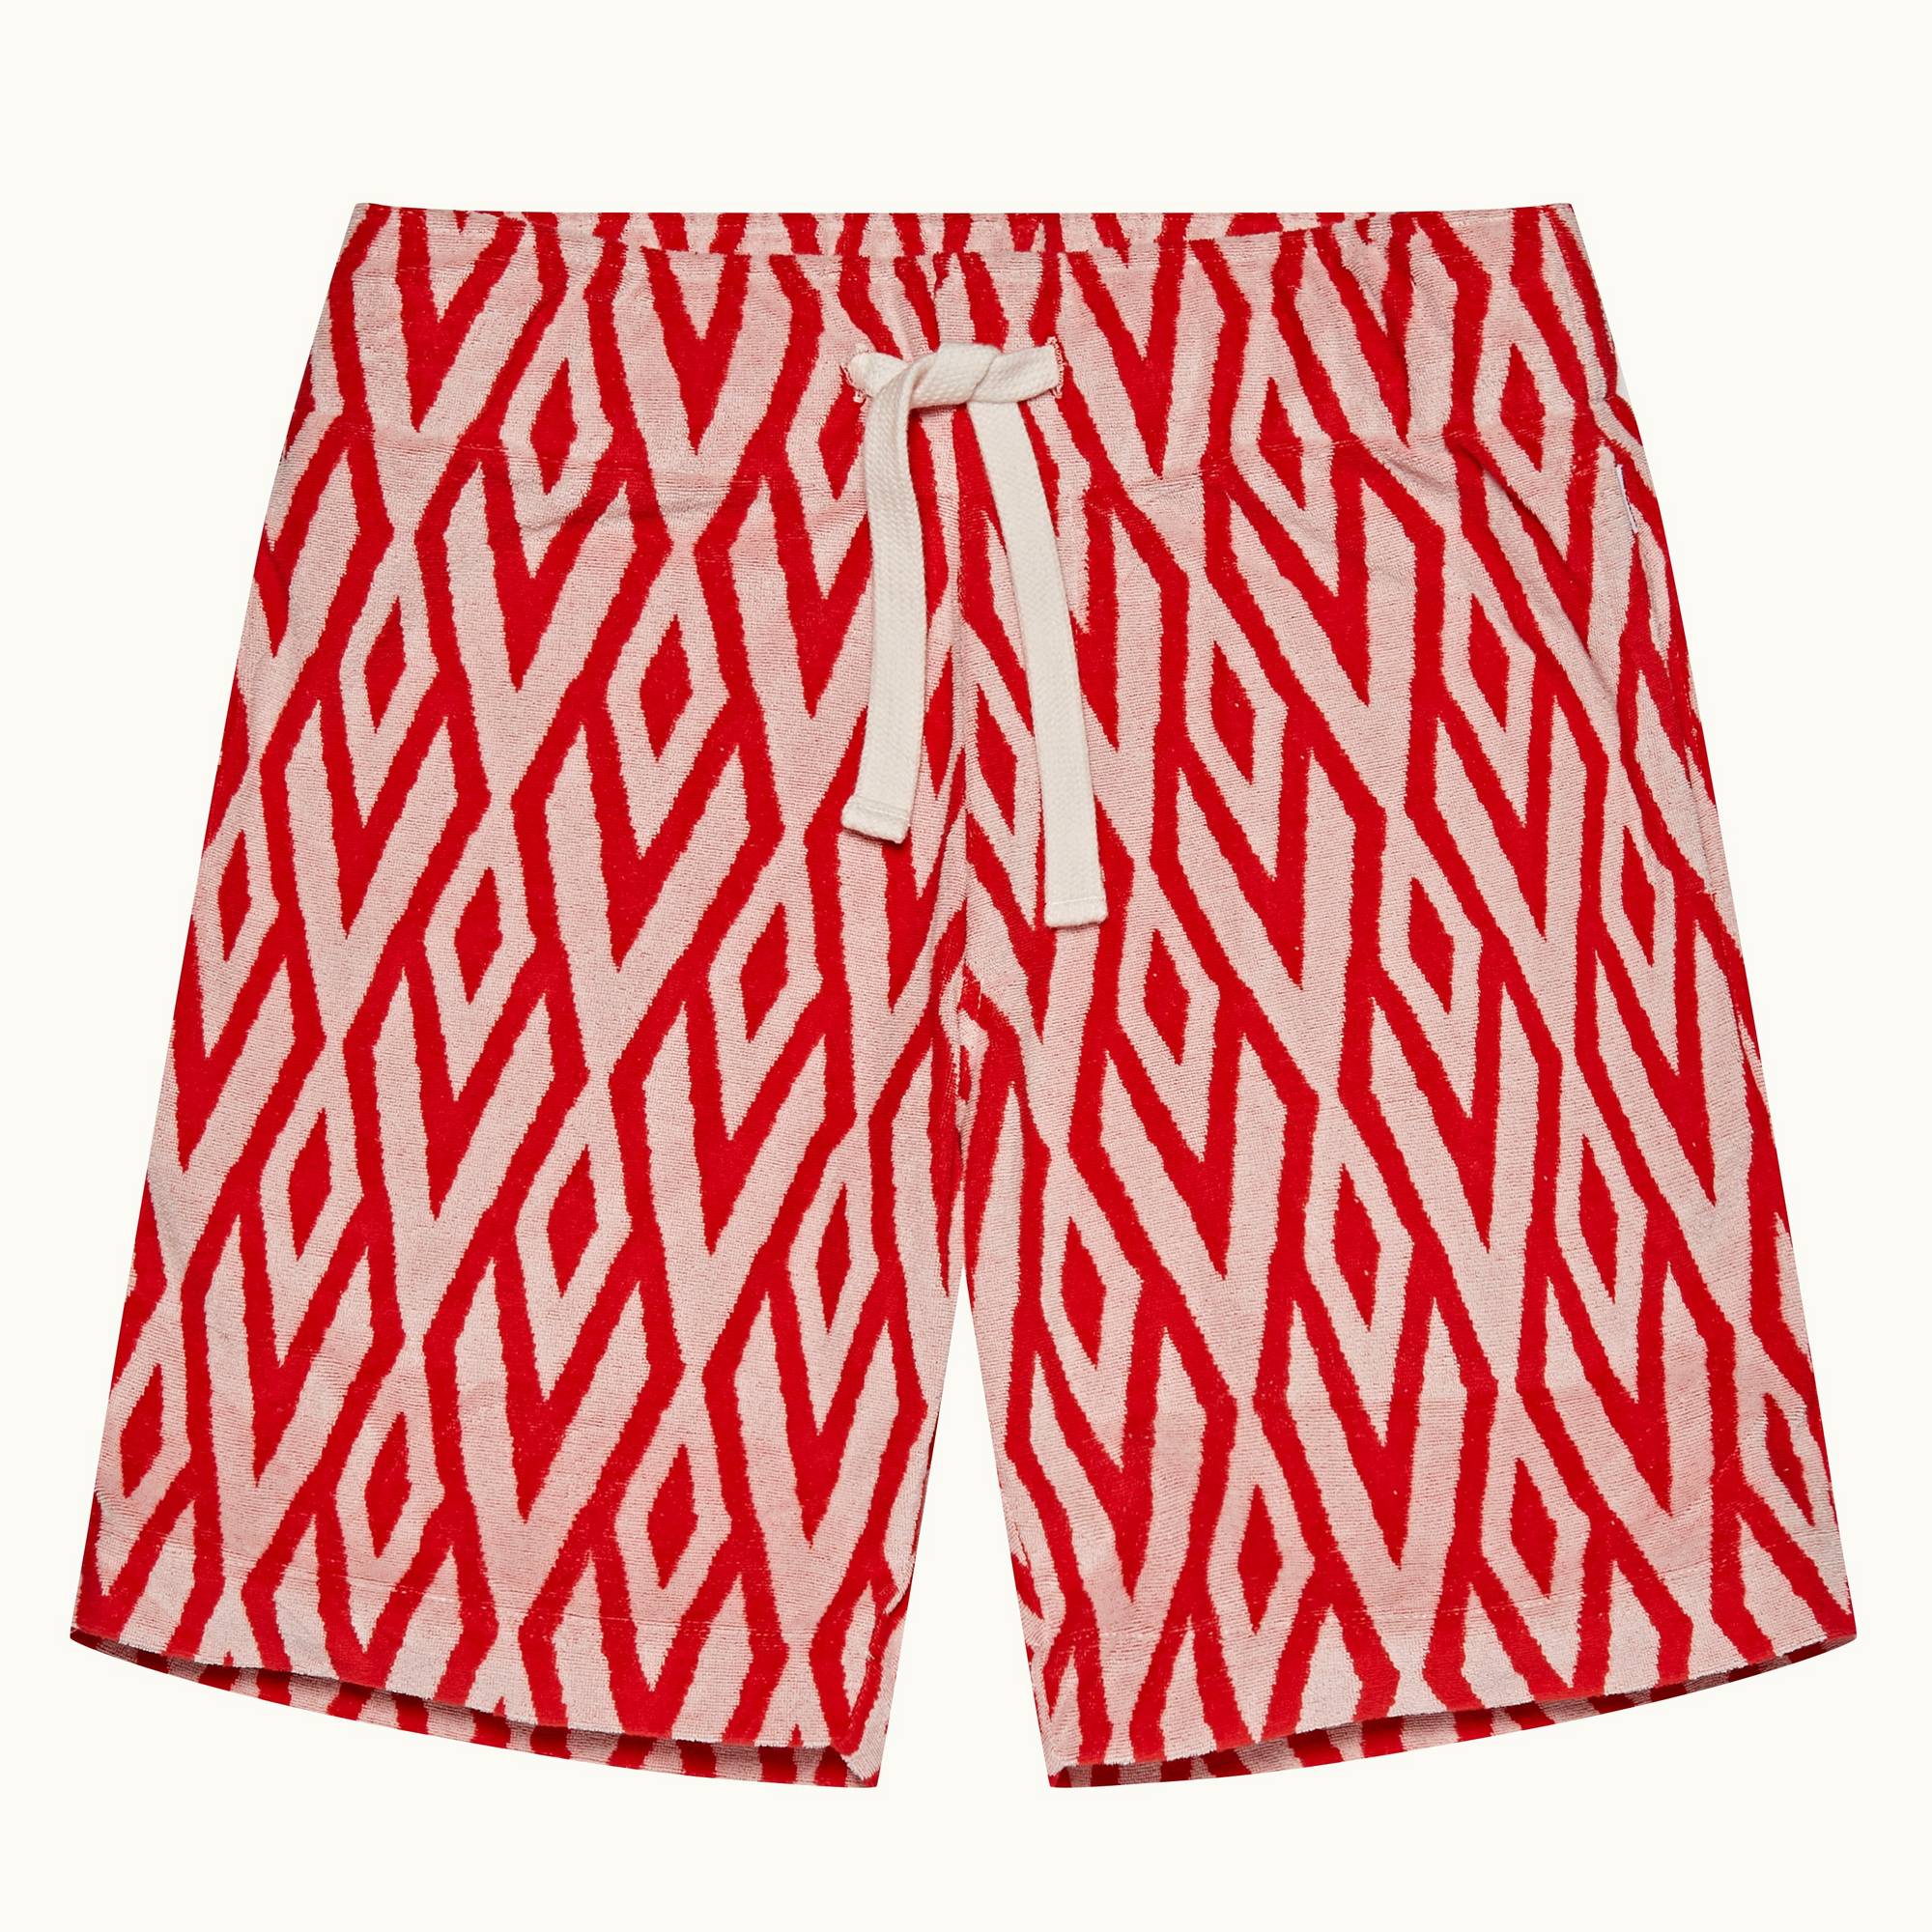 Trevone - Mens Summer Red/White Sand Cano Jacquard Towelling Sweat Shorts